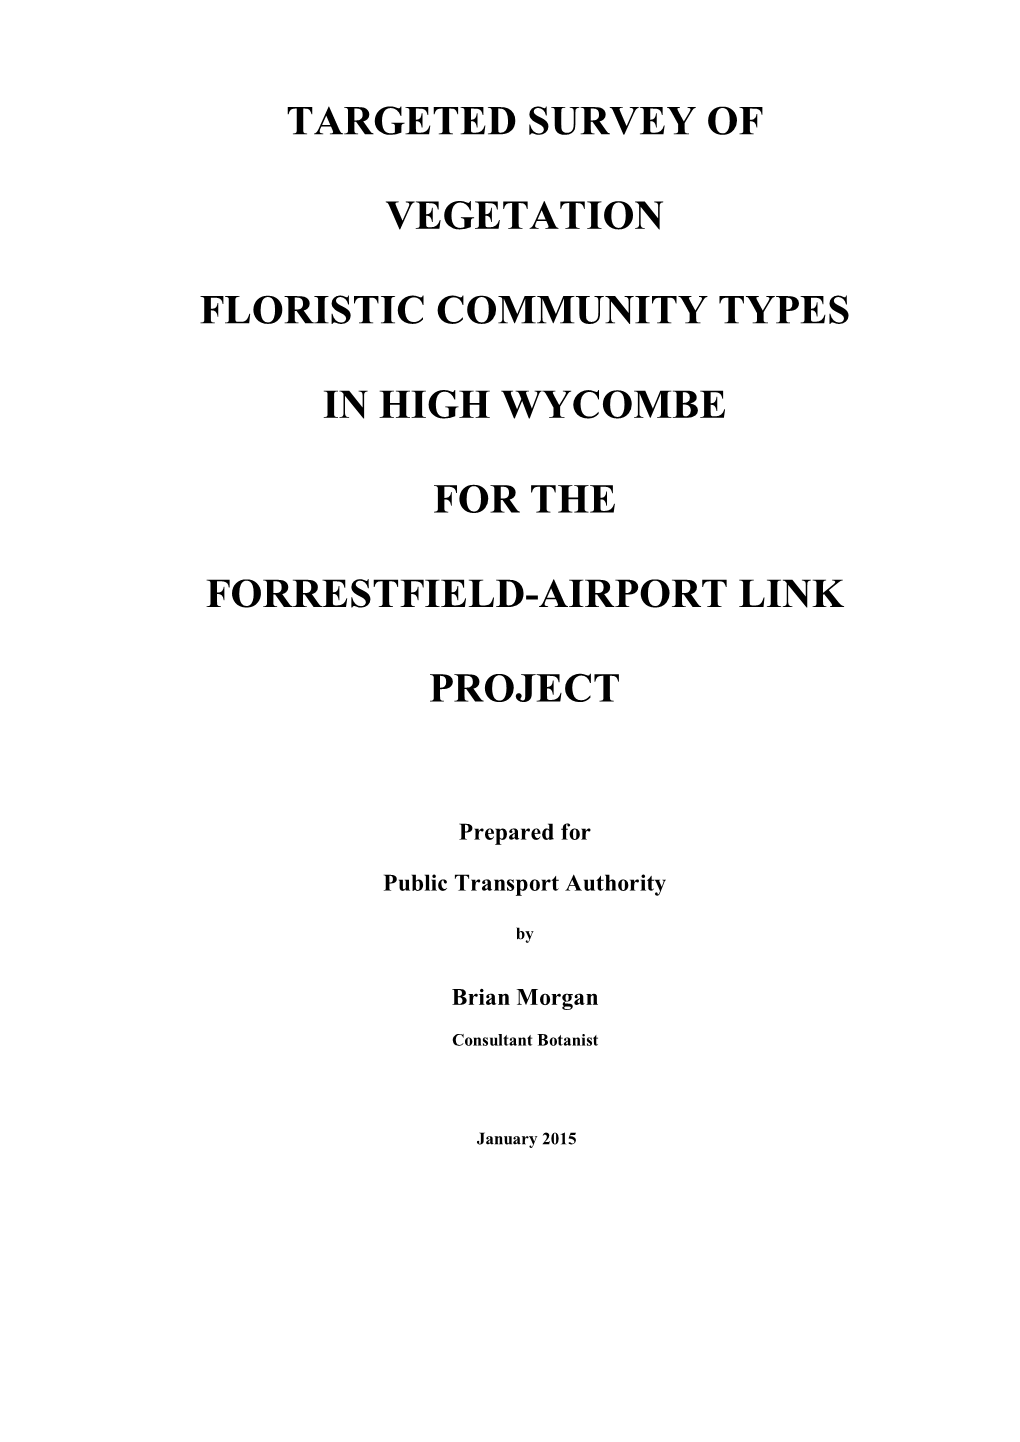 Targeted Survey of Vegetation Floristic Community Types in High Wycombe for the Forrestfield-Airport Link Project